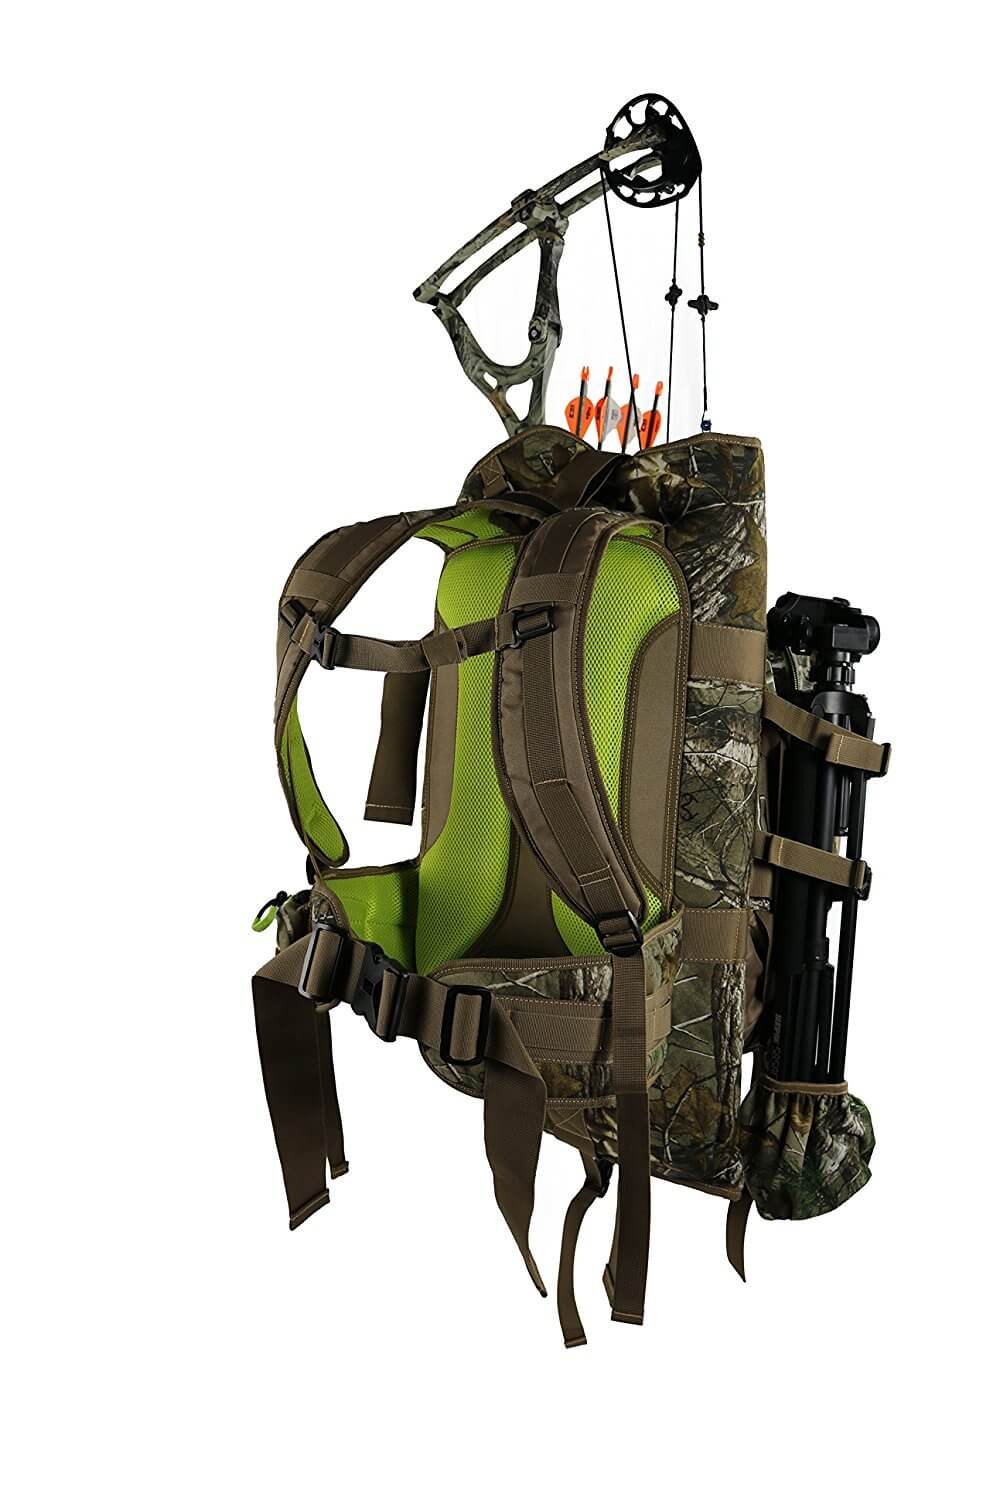 Best Bow Hunting Backpack - #4 In Sights Realtree Xtra Multi Pack - Back View